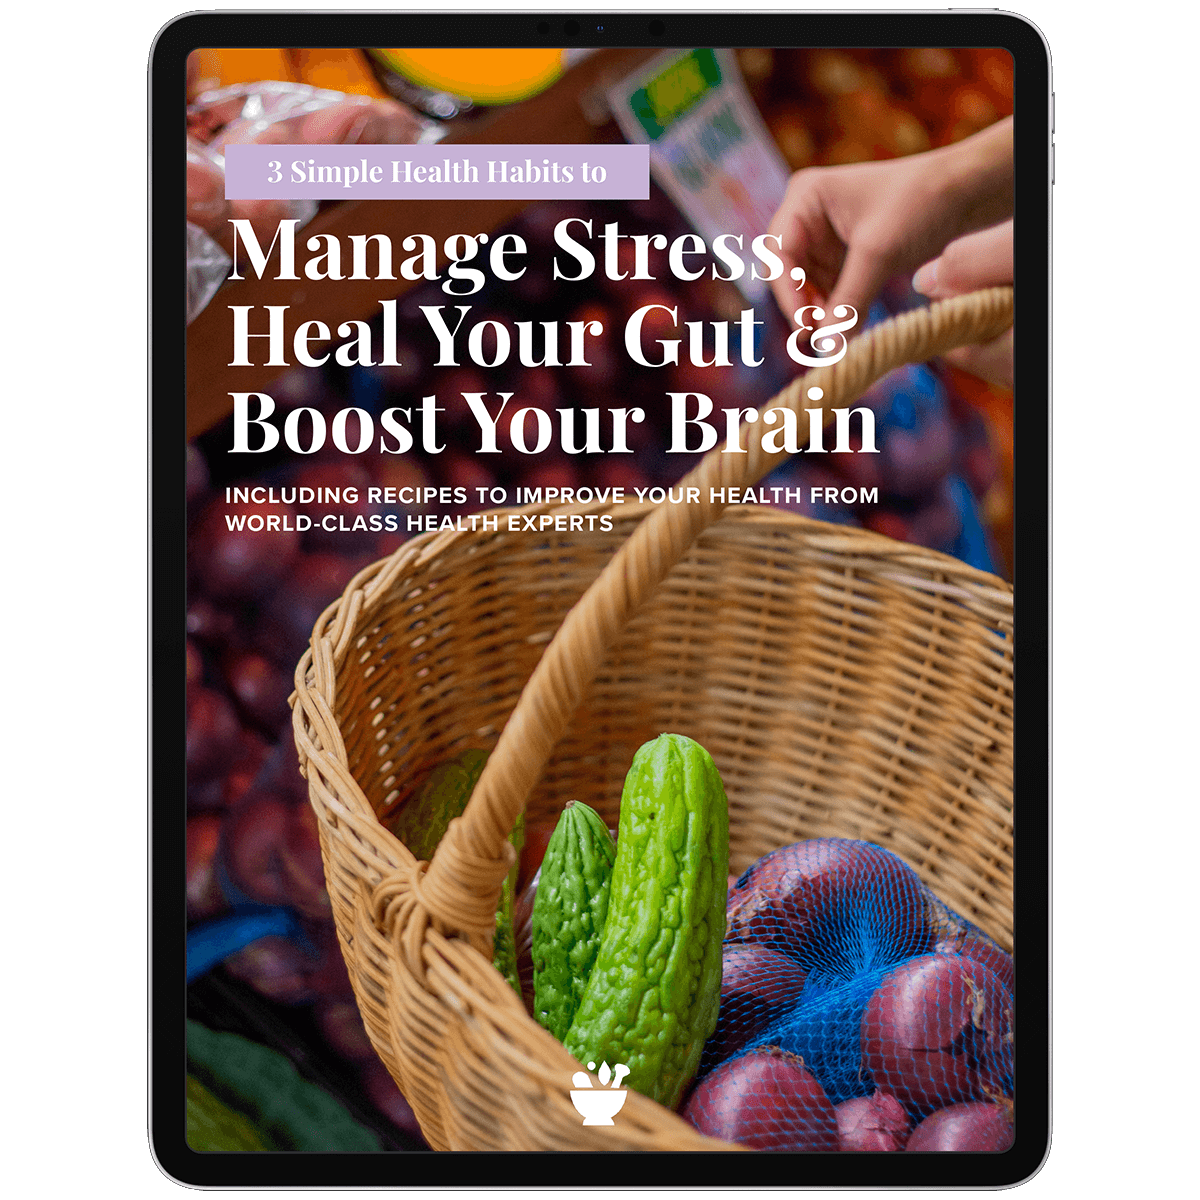 [FREE EBOOK] 3 Simple Health Habits to Manage Stress, Heal Your Gut & Boost Your Brain.